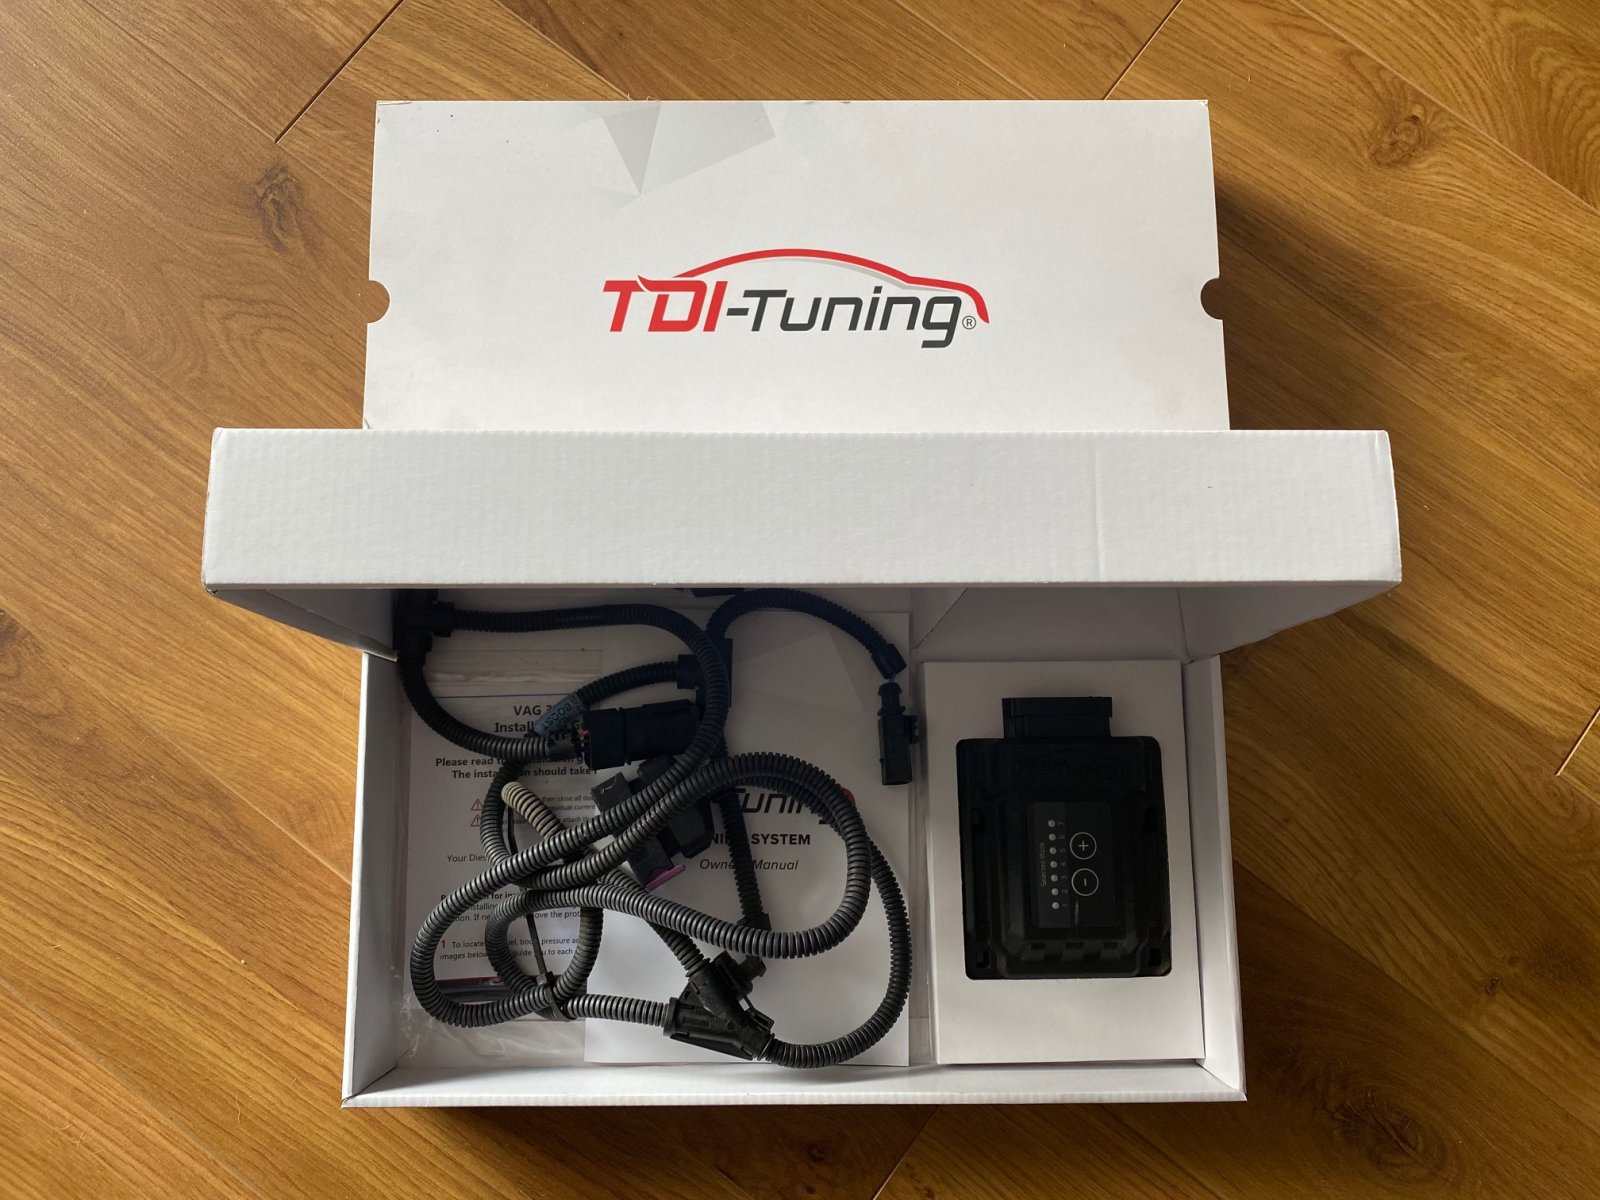 Performance: - TDI Tuning Box - CRTD4 with Bluetooth previously 